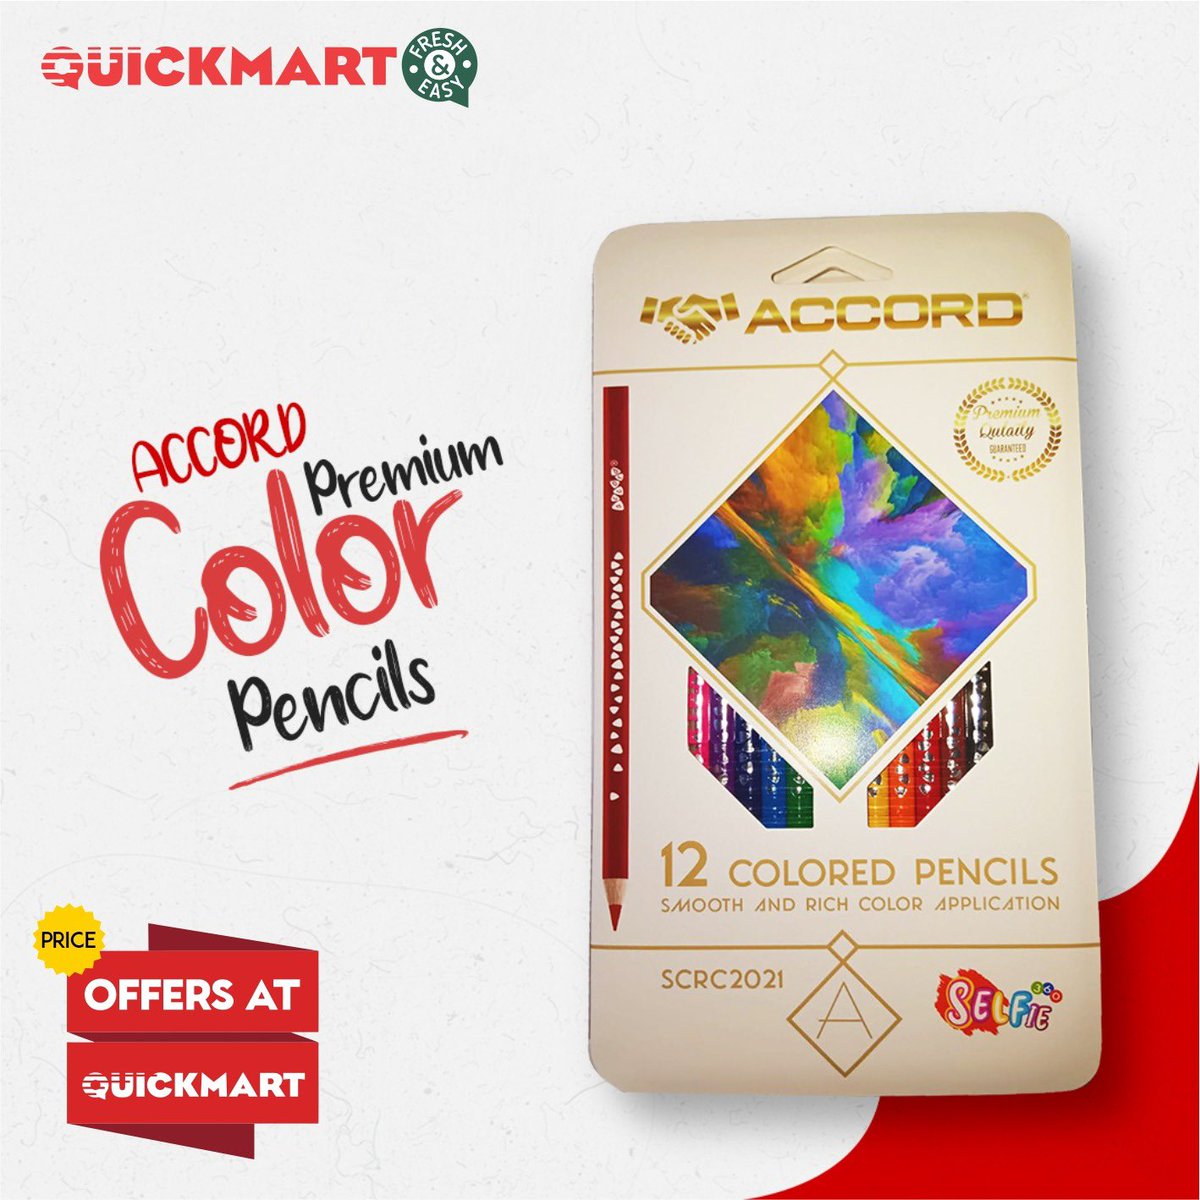 Buy the #Accord Premium Colour Pencil for vibrant artwork! Find them on offers at @QuickmartKenya. These high-quality colour pencils are perfect for various drawing needs, are reliable and durable. Suitable for use at #home , #school , or the #office. #Beinafuu @store_centropen